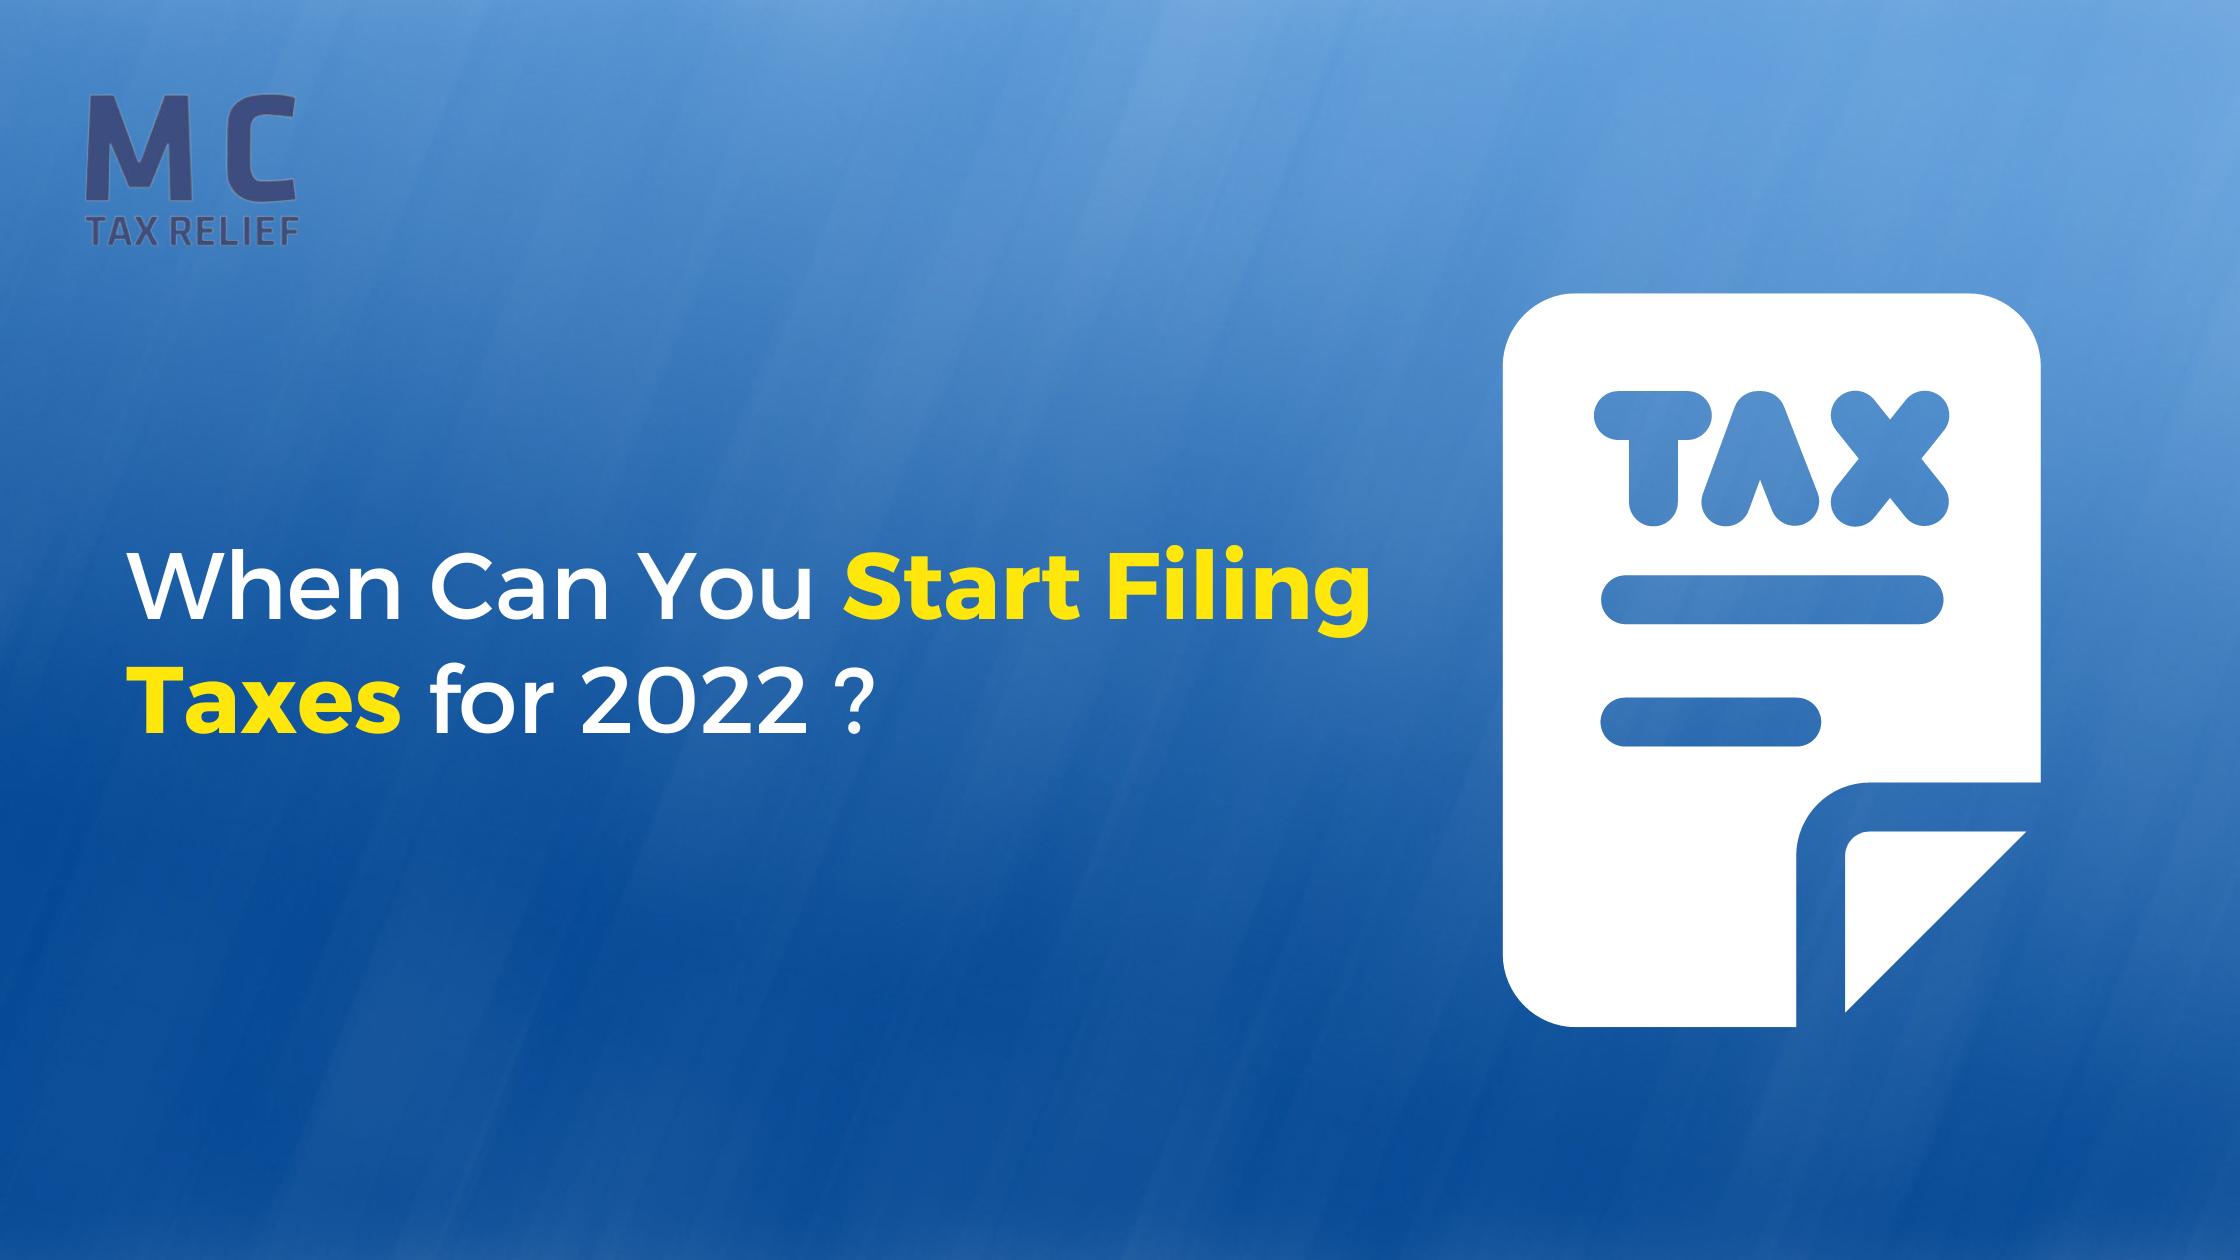 When Can You Start Filing Taxes for 2022